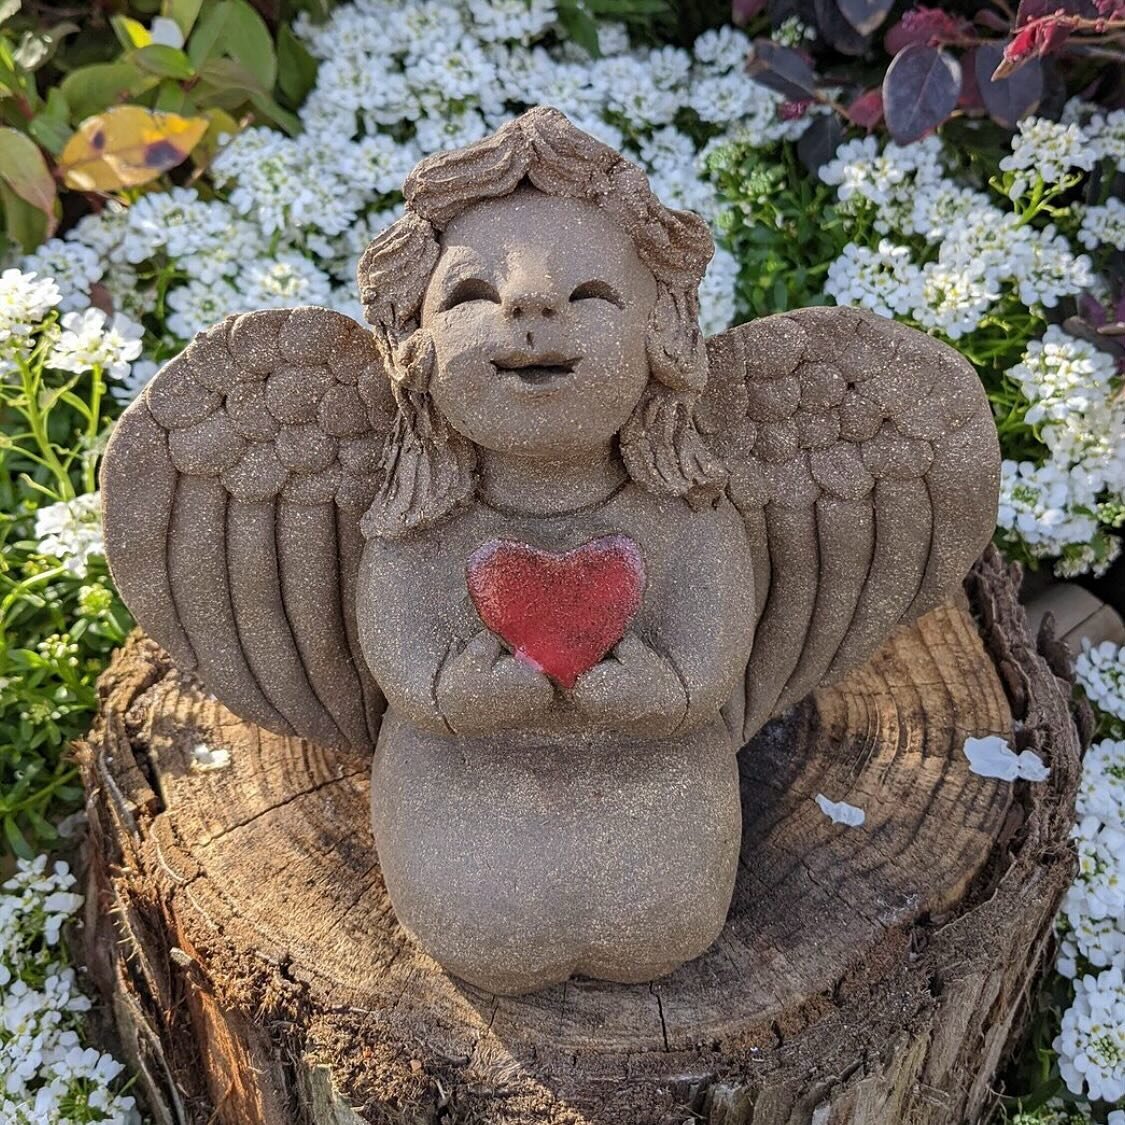 Earth Arts Studio was founded by the iconic Central Valley sculptor Margaret Hudson, who created unique sculptures inspired by her surroundings using clay. Her legacy continues on today through local artists at the Studio. All of their products are s